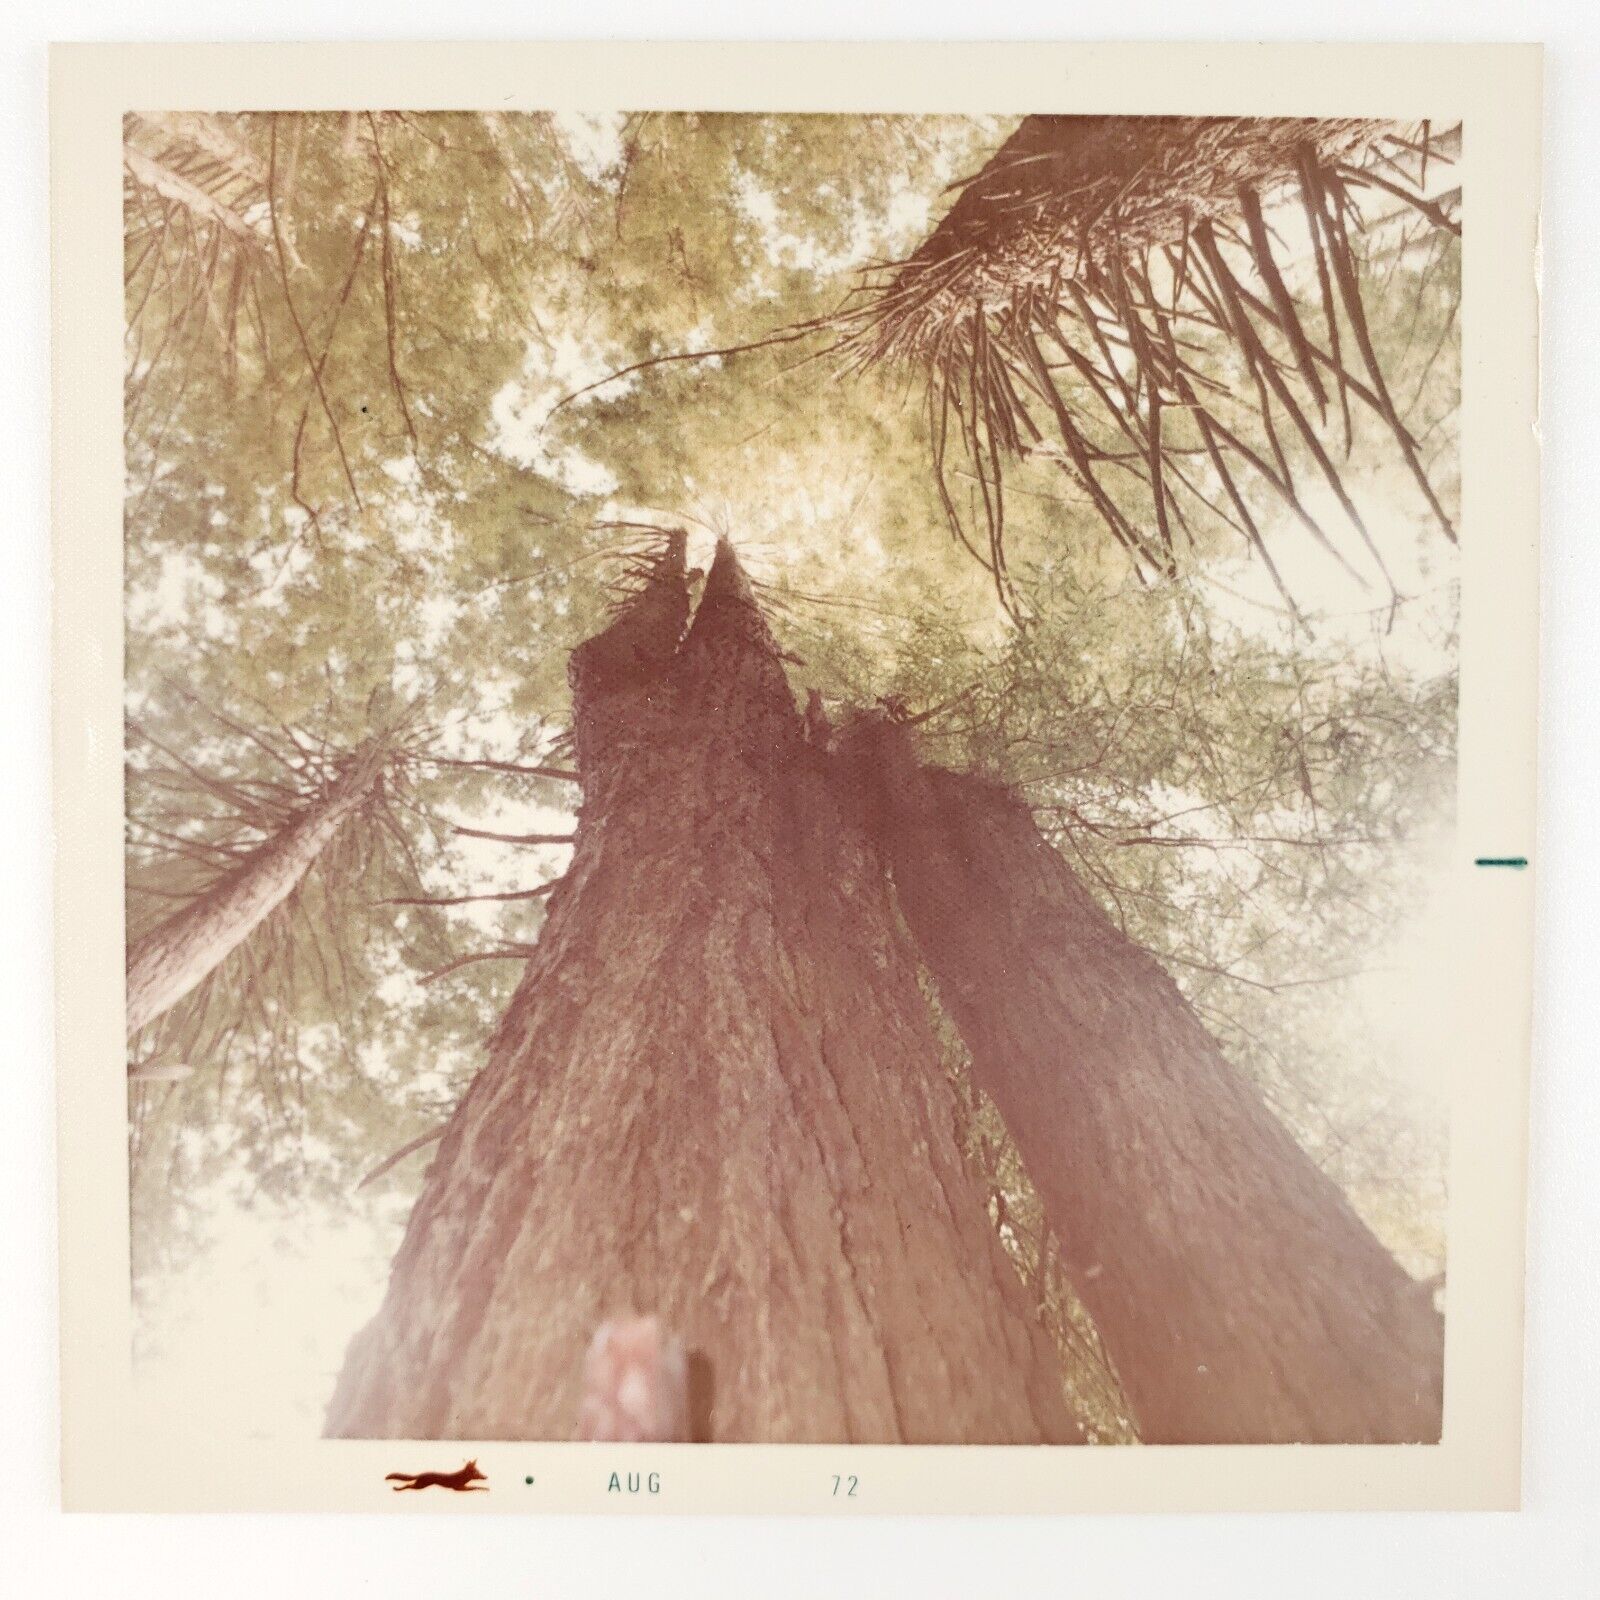 Looking Up At Treetops Photo 1970s Vintage Color Forest Trees Snapshot Art D904